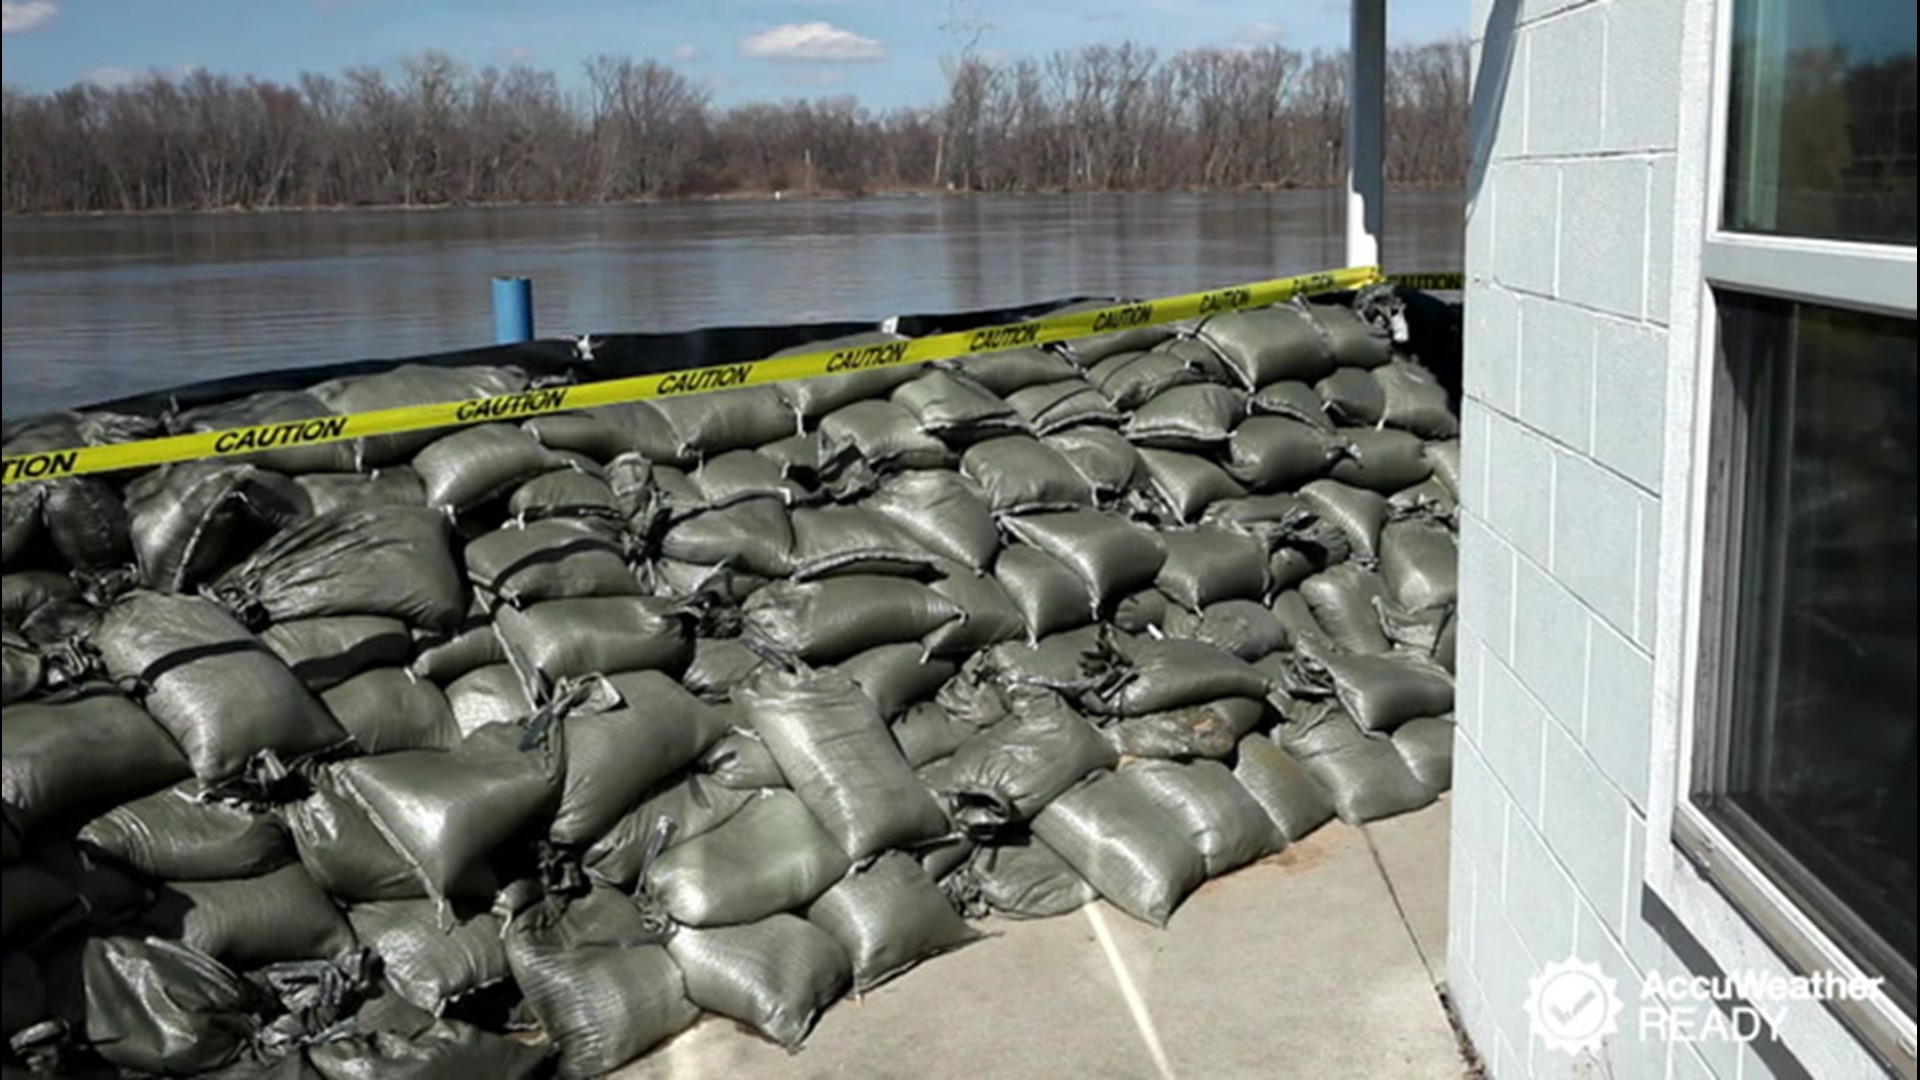 It's common to see homes barricaded with sandbags in anticipation for severe flooding.  Why are sandbags used and what makes them so effective?  Let's find out